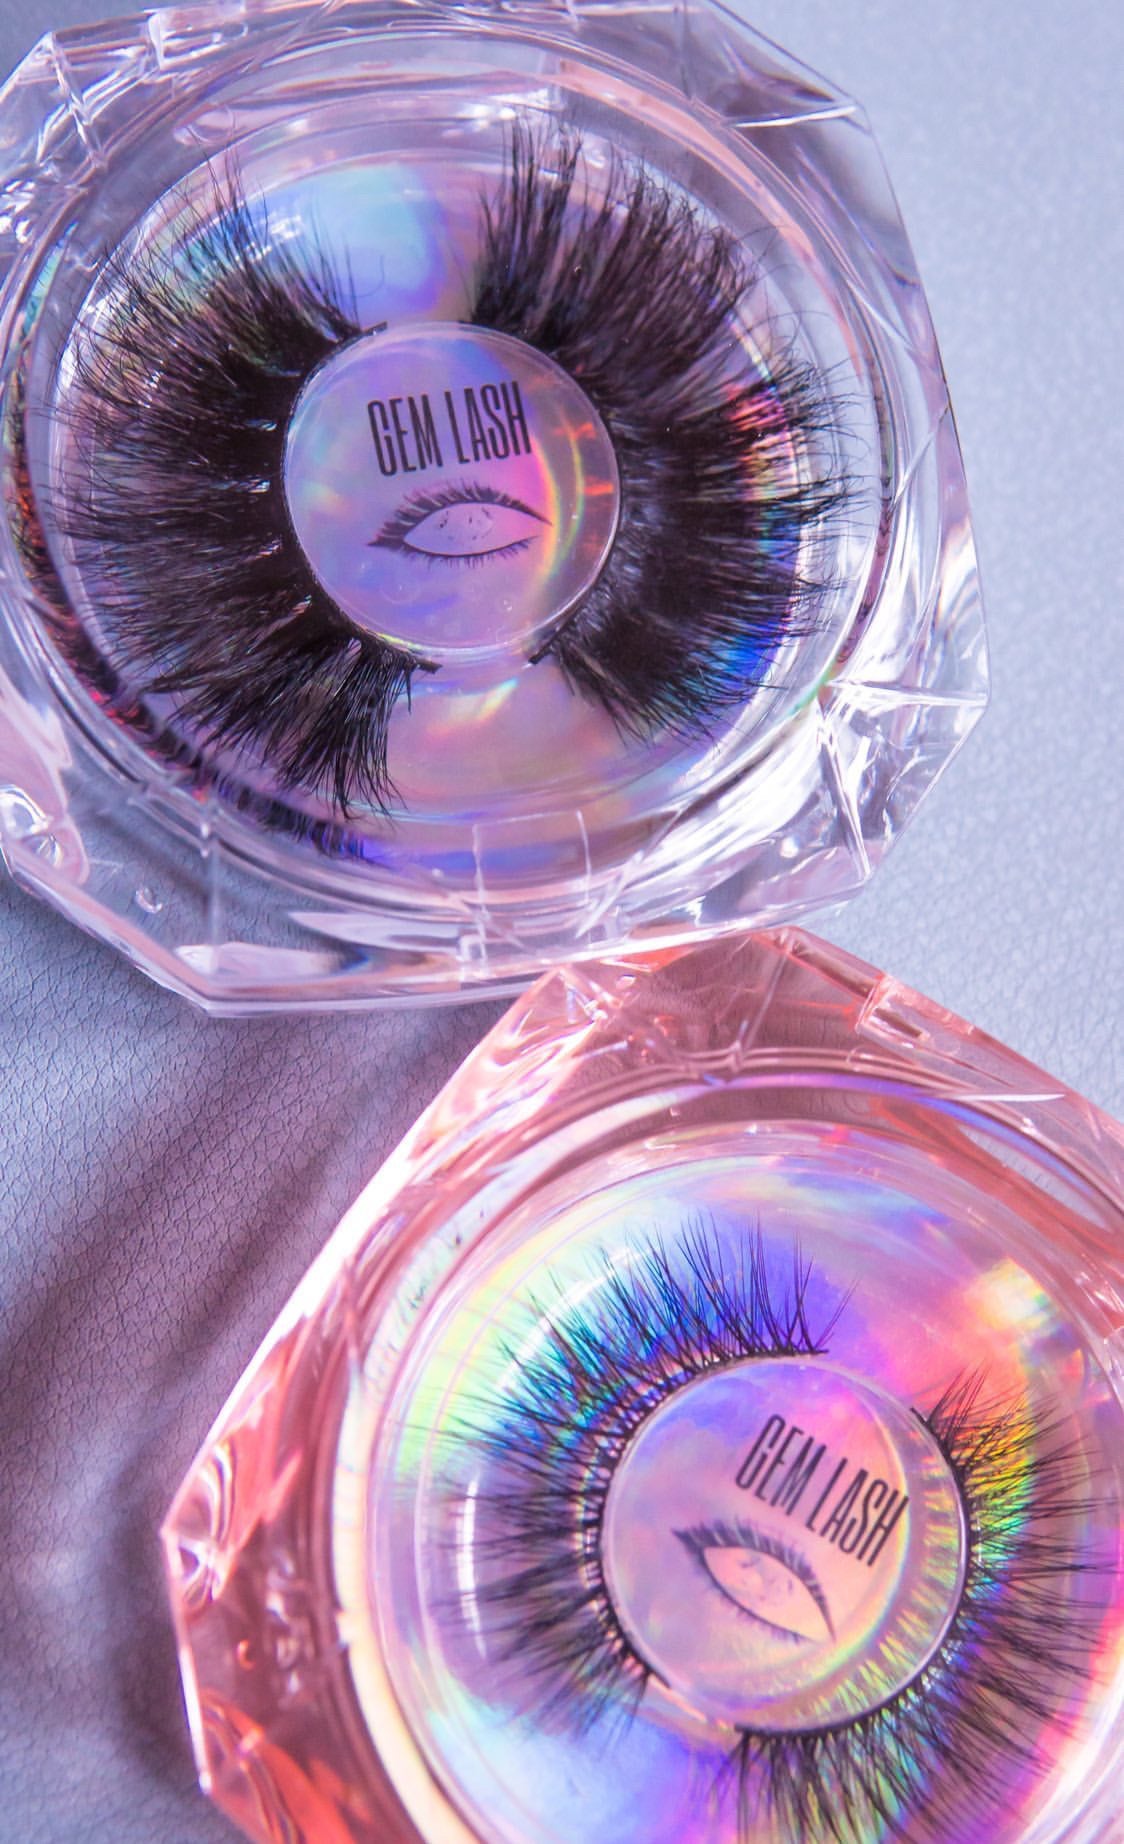 The True Gems 20 MM Lashes